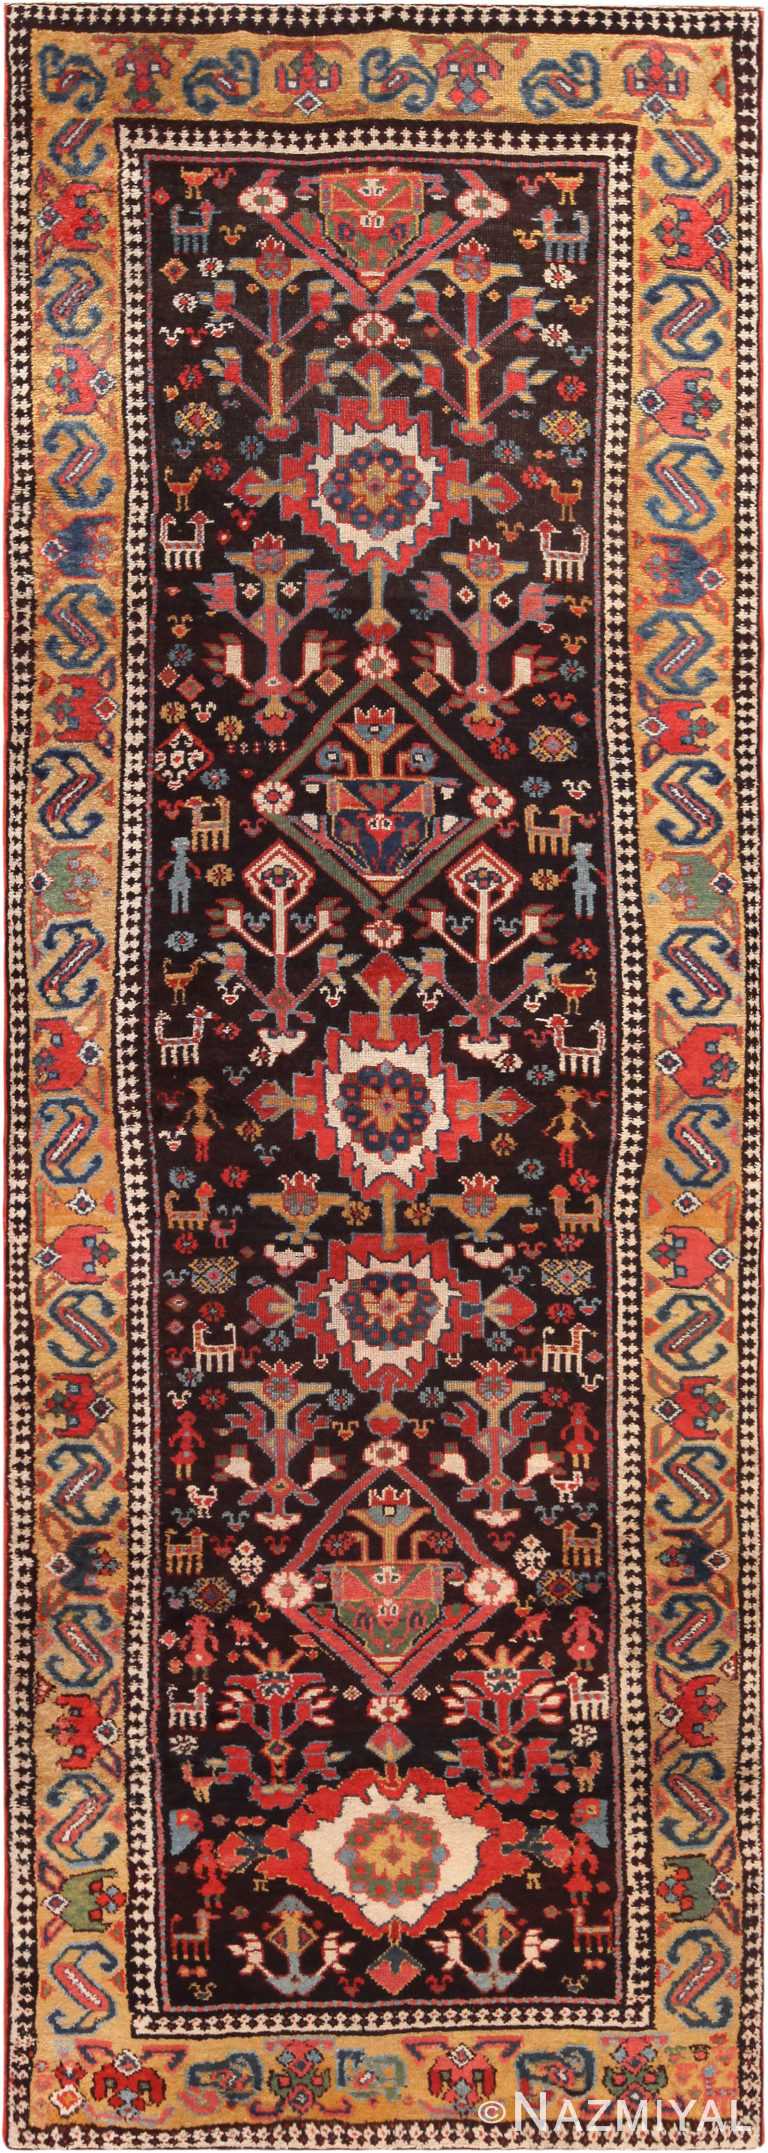 Colorful Antique North West Persian Runner Rug 72112 by Nazmiyal Antique Rugs